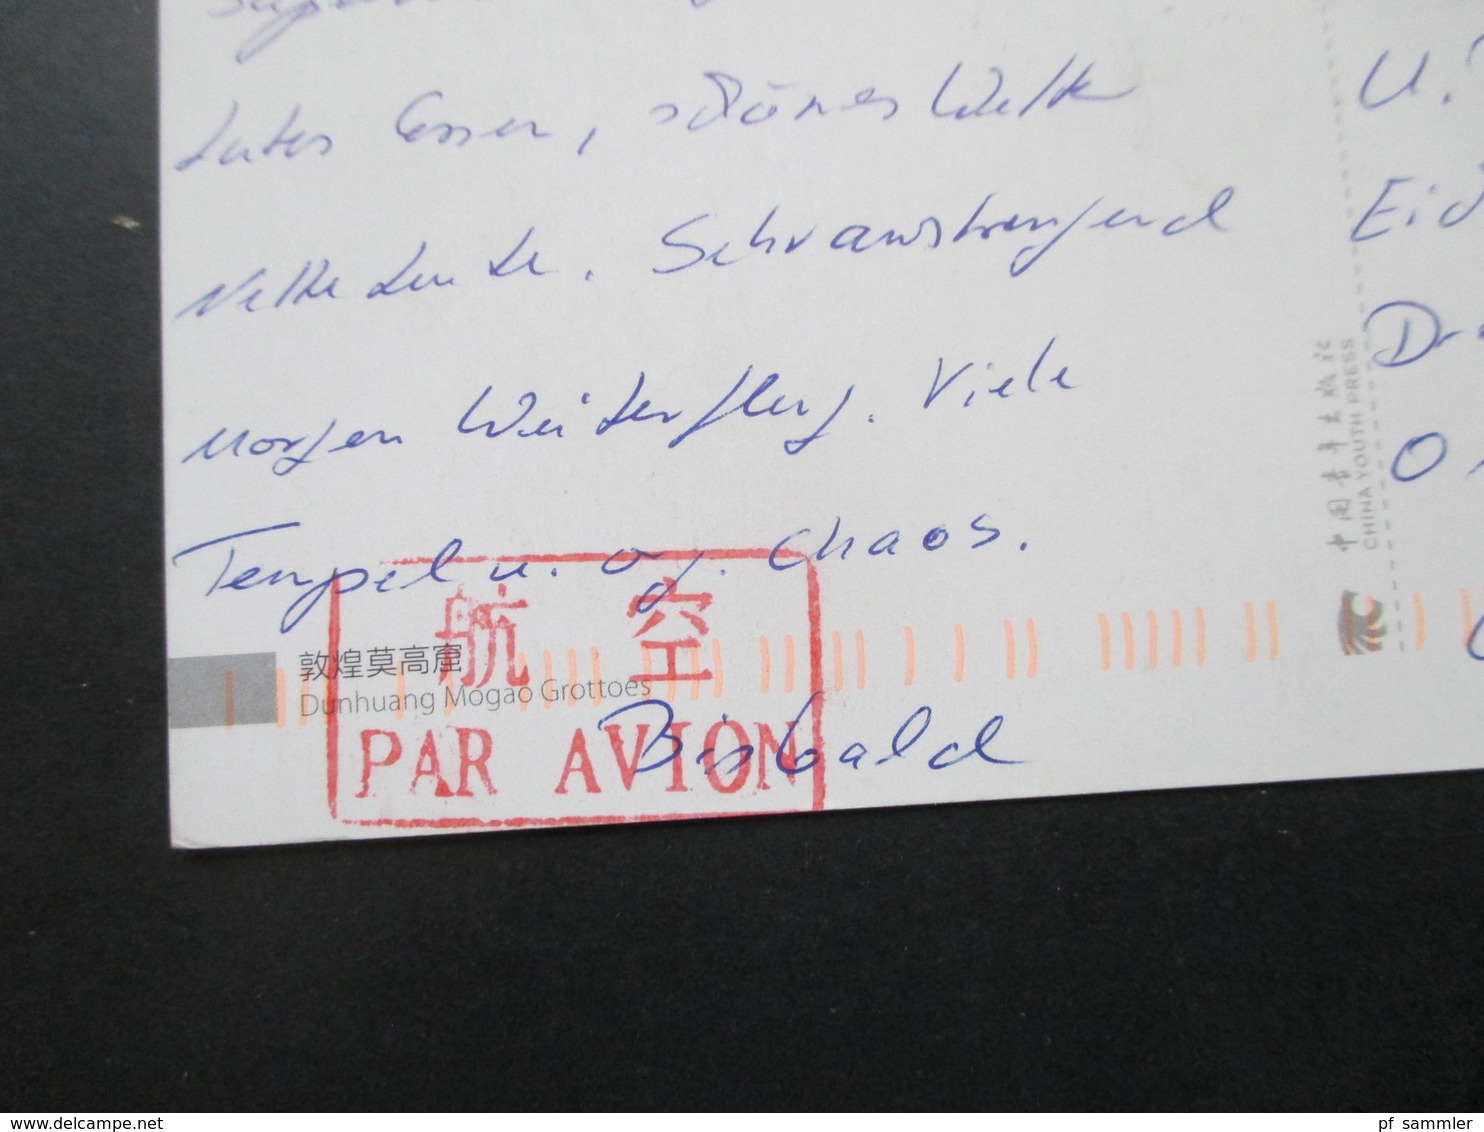 China 1998 / 2011 Postkarte / Luftpost Stempel In Rot! Dunhuang Magao Grottoes Mit 2 Marken Frankiert! - Briefe U. Dokumente